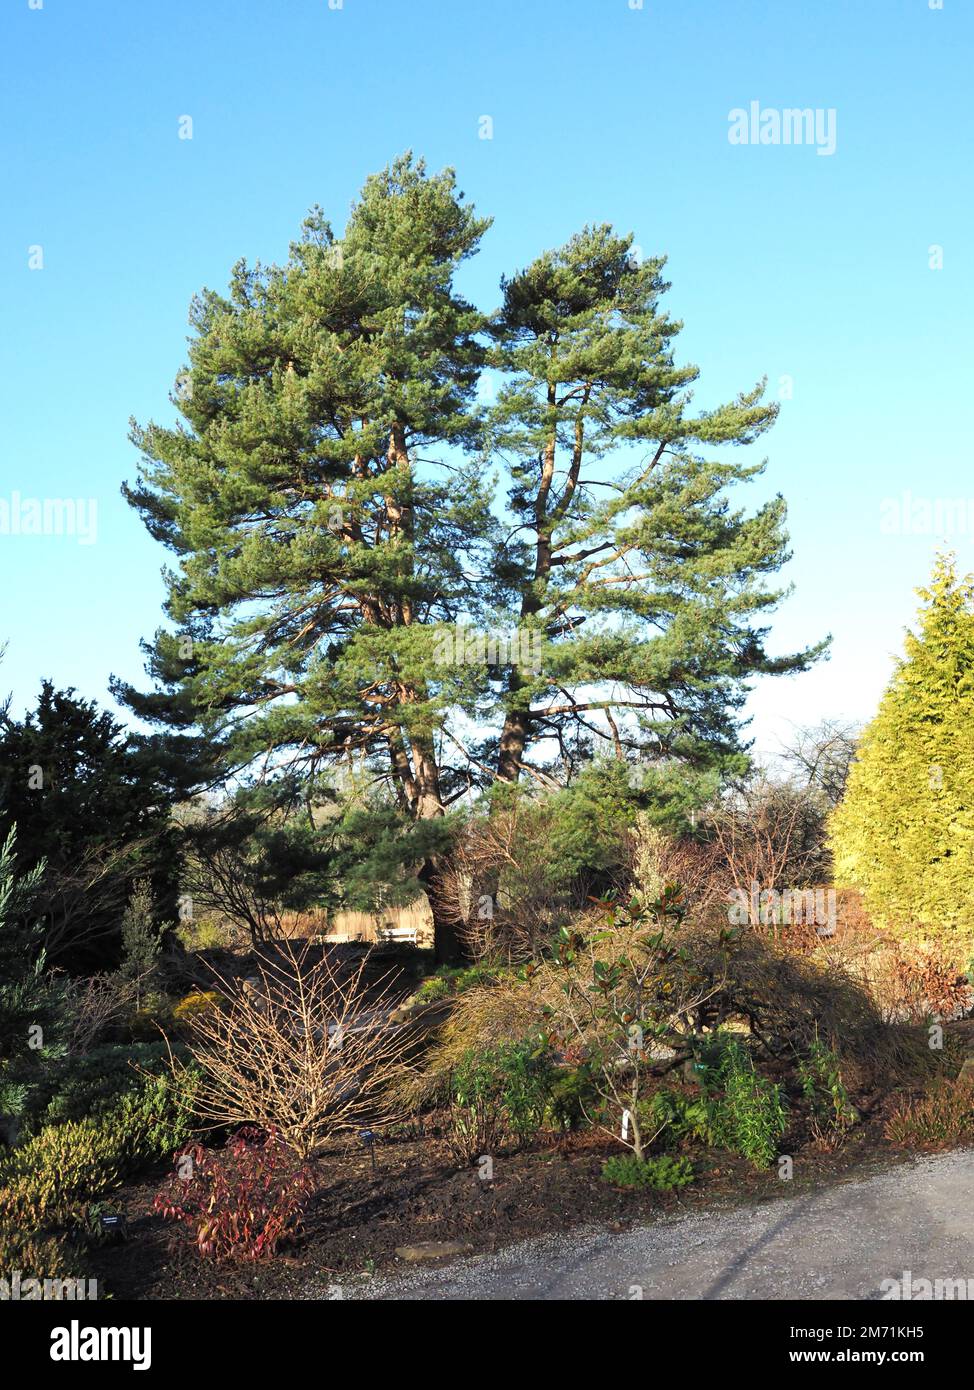 Tall pine tree in a garden with a blue sky Stock Photo